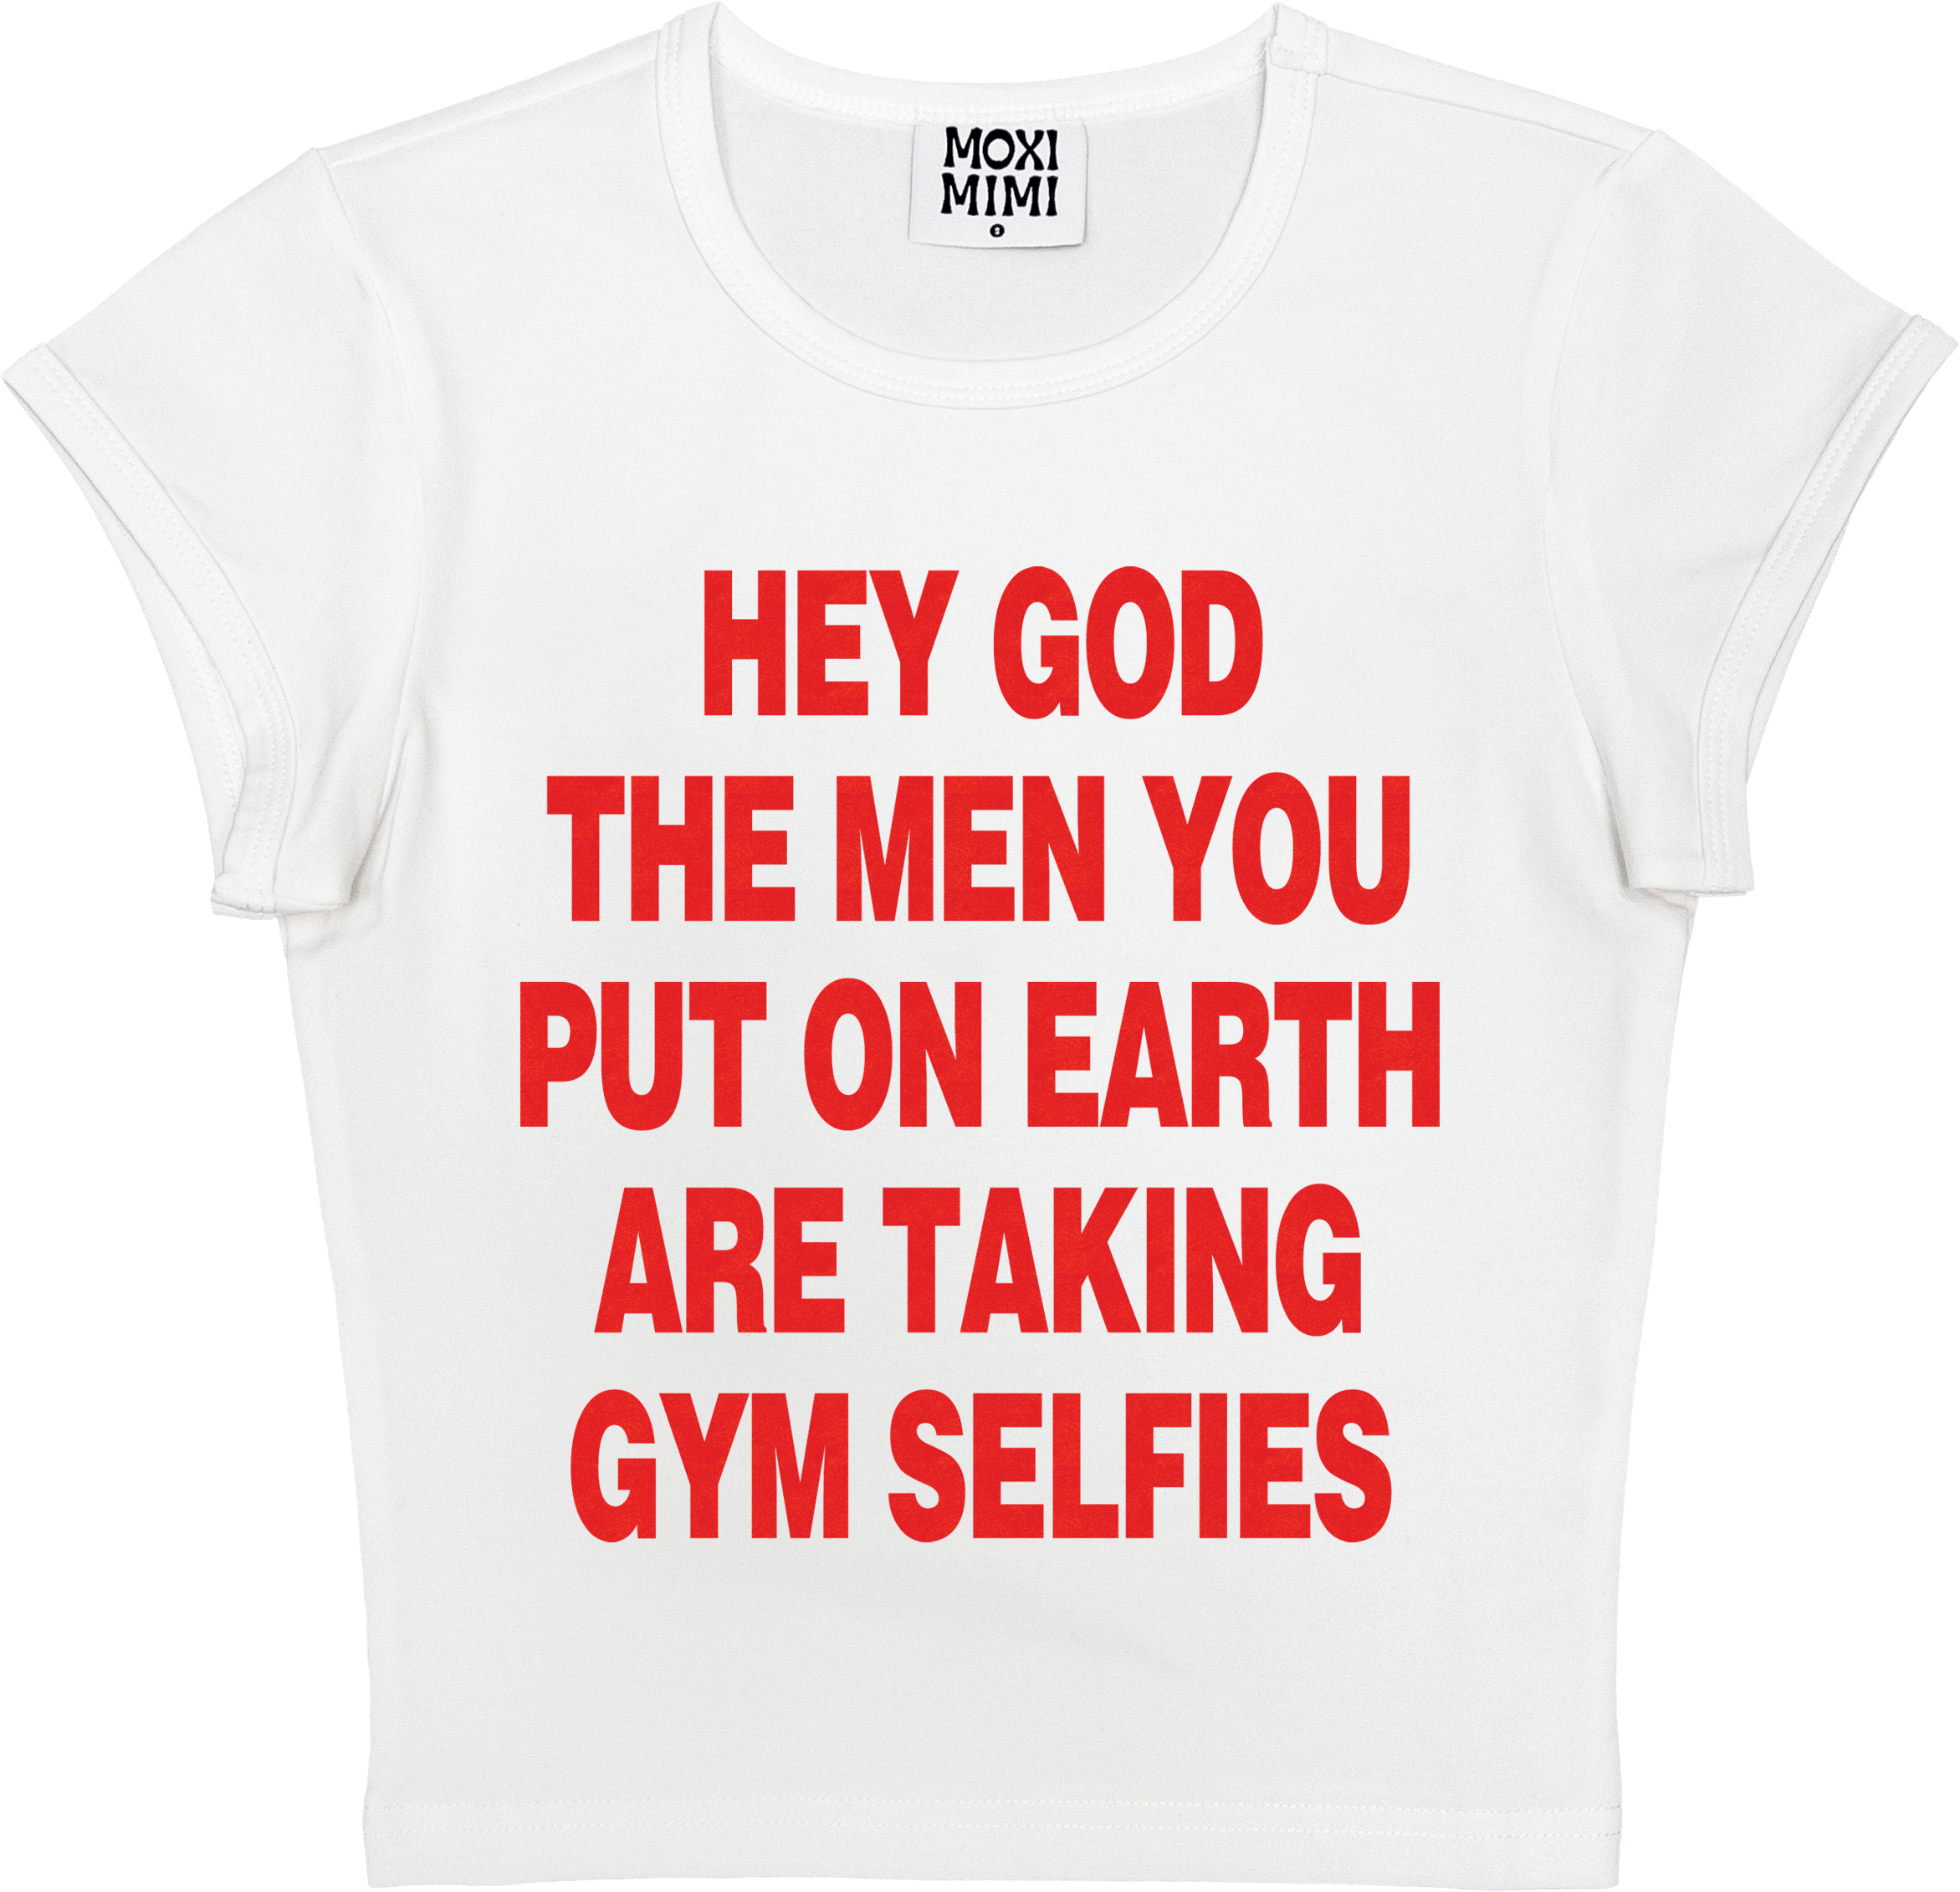 Hey God The Men You Put On Earth Are Taking Gym Selfies